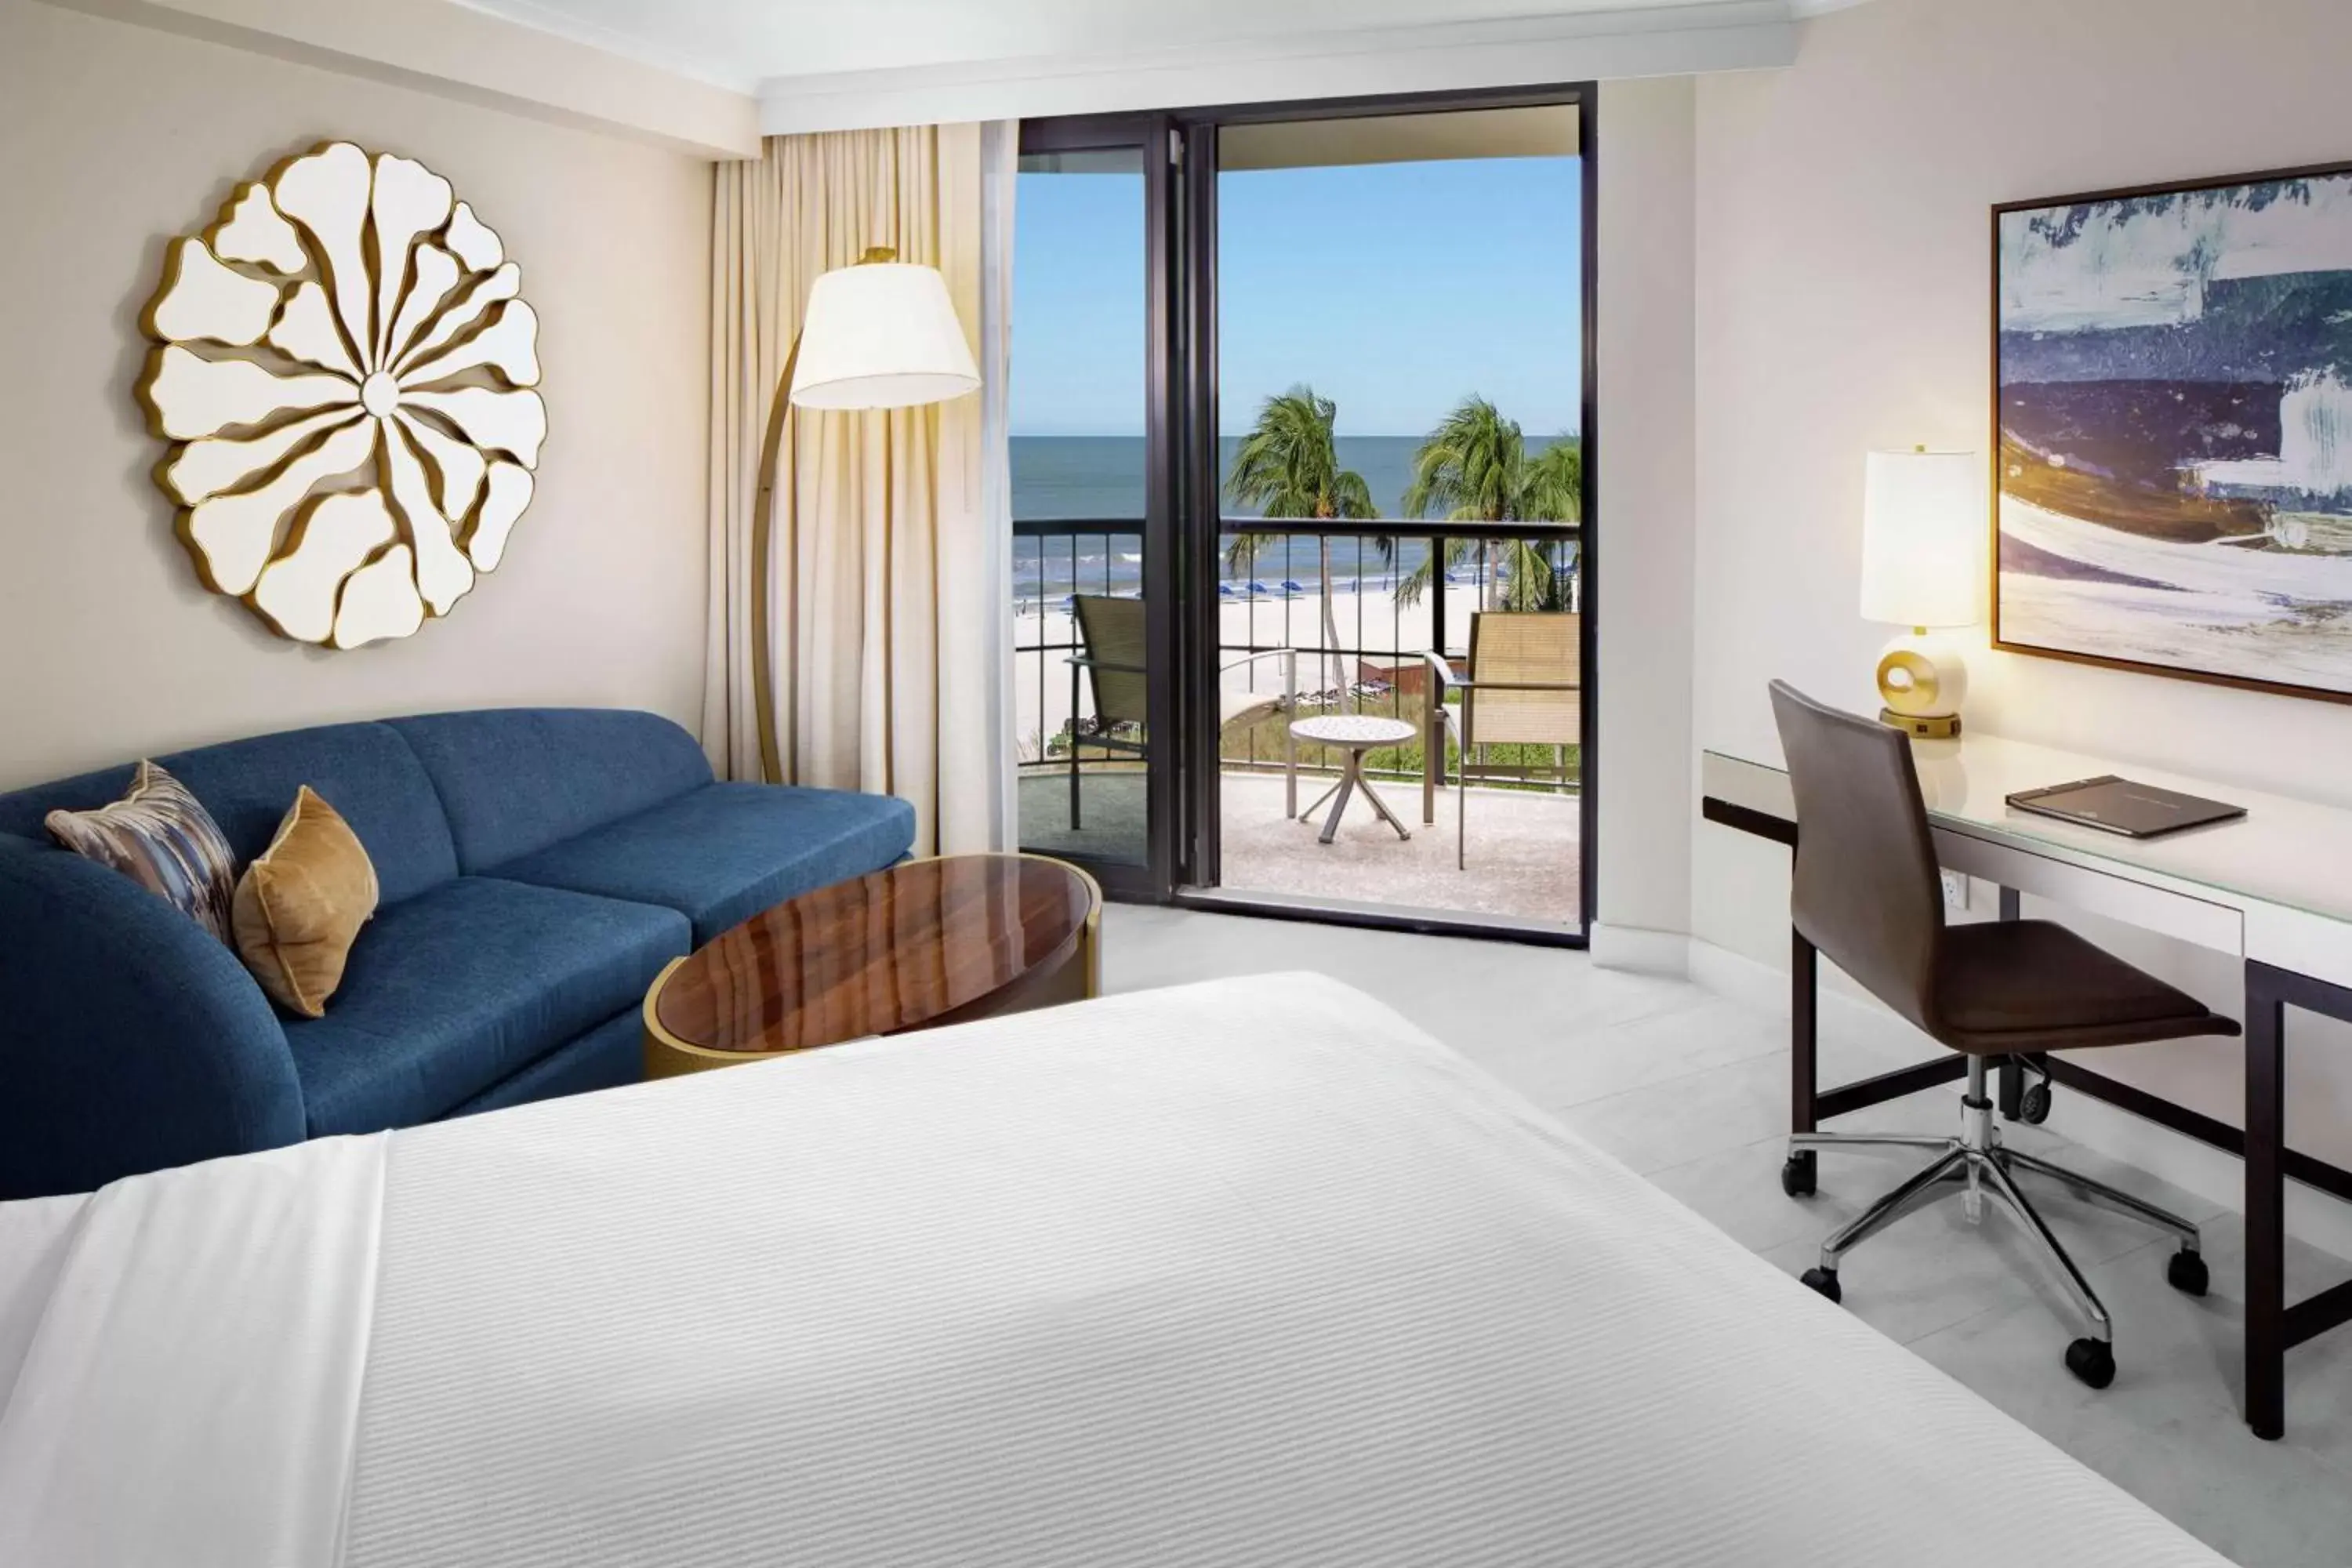 Bedroom in Hilton Marco Island Beach Resort and Spa